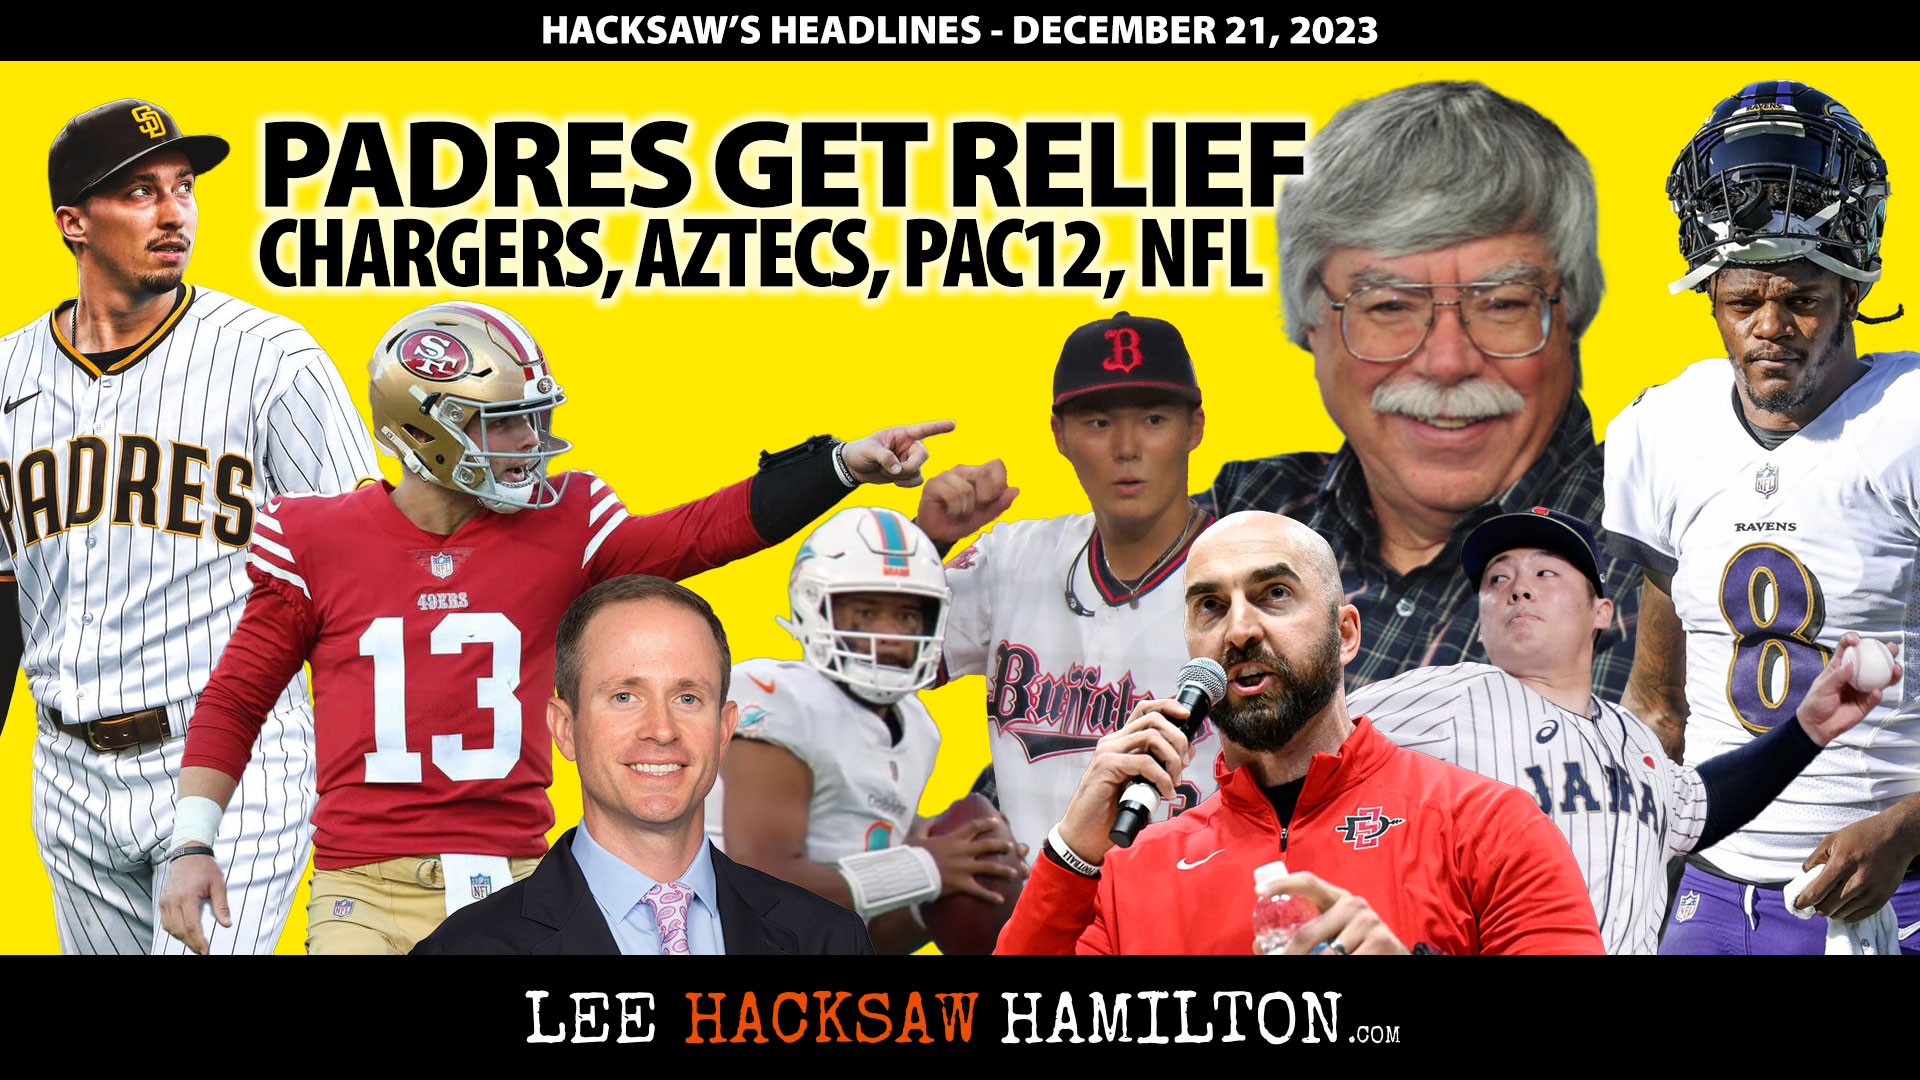 Lee Hacksaw Hamilton discusses Padres Sign Matsui, Dodgers, Angels, NFL Weekend, Chargers, Aztecs, PAC12